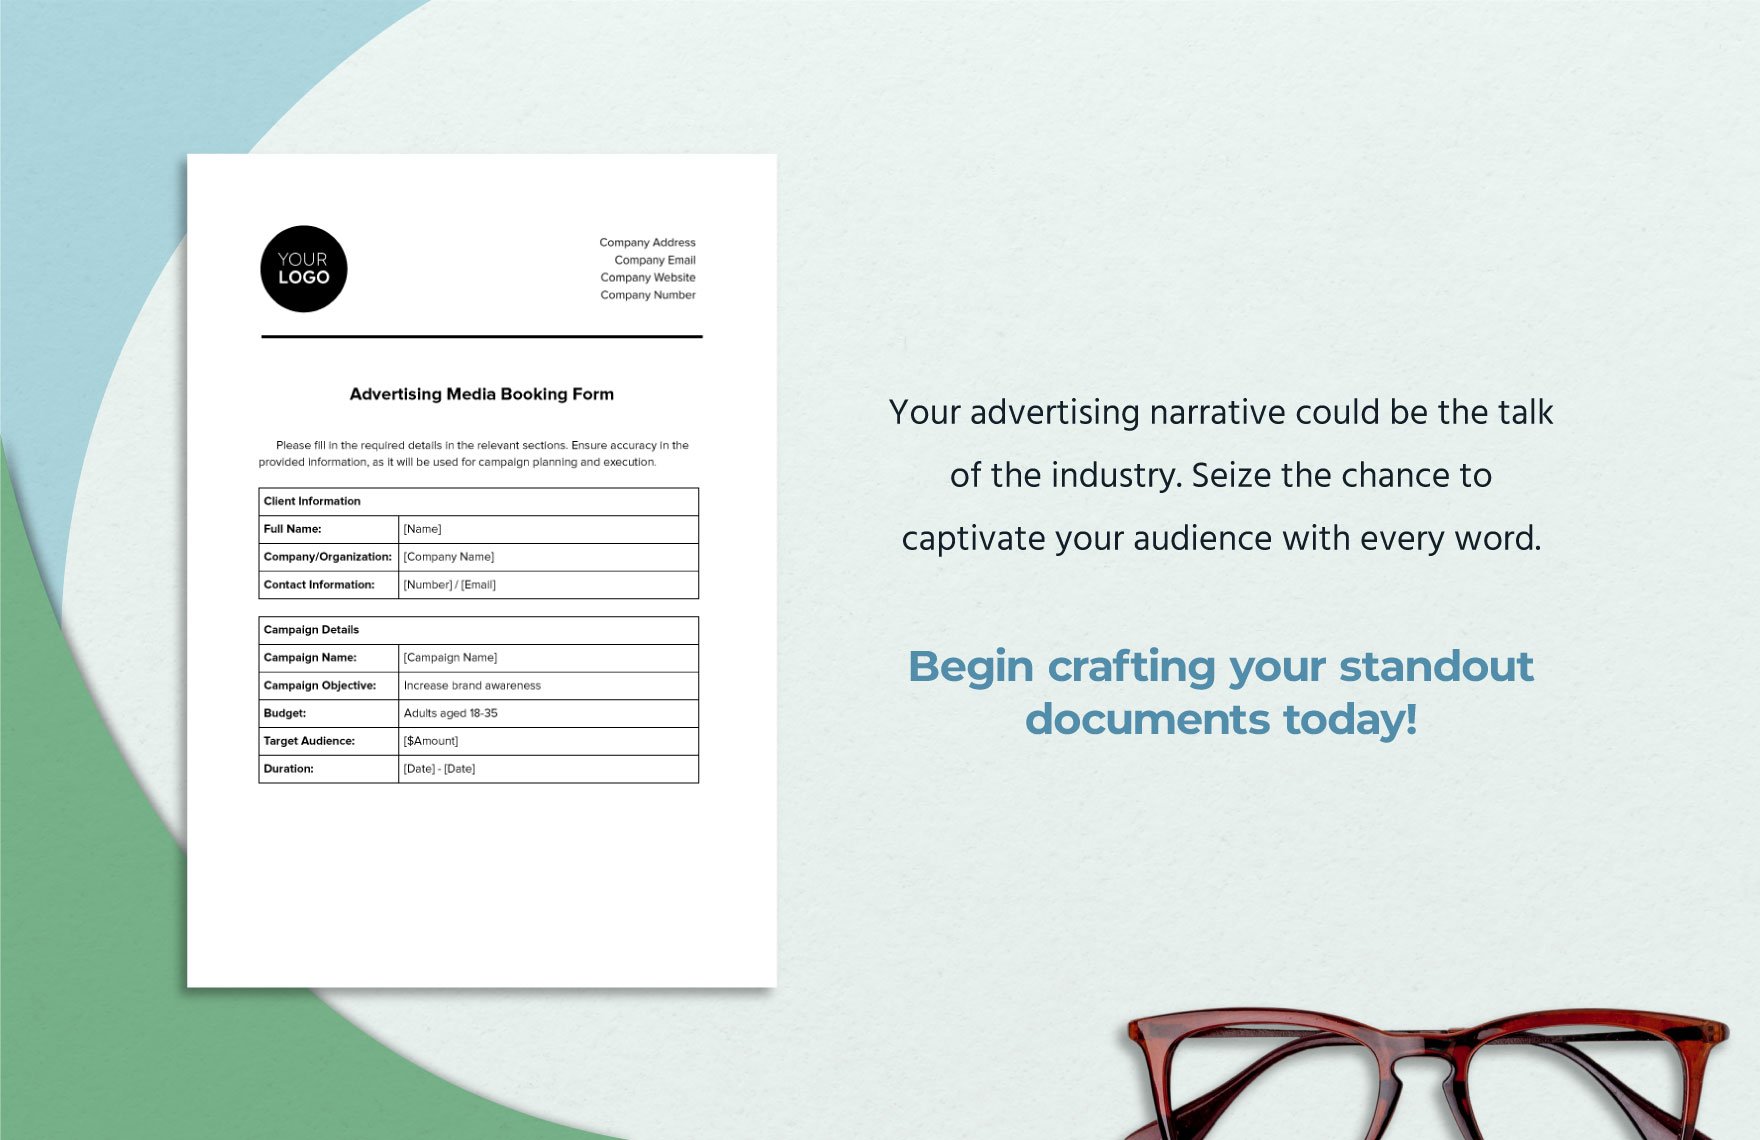 Advertising Media Booking Form Template